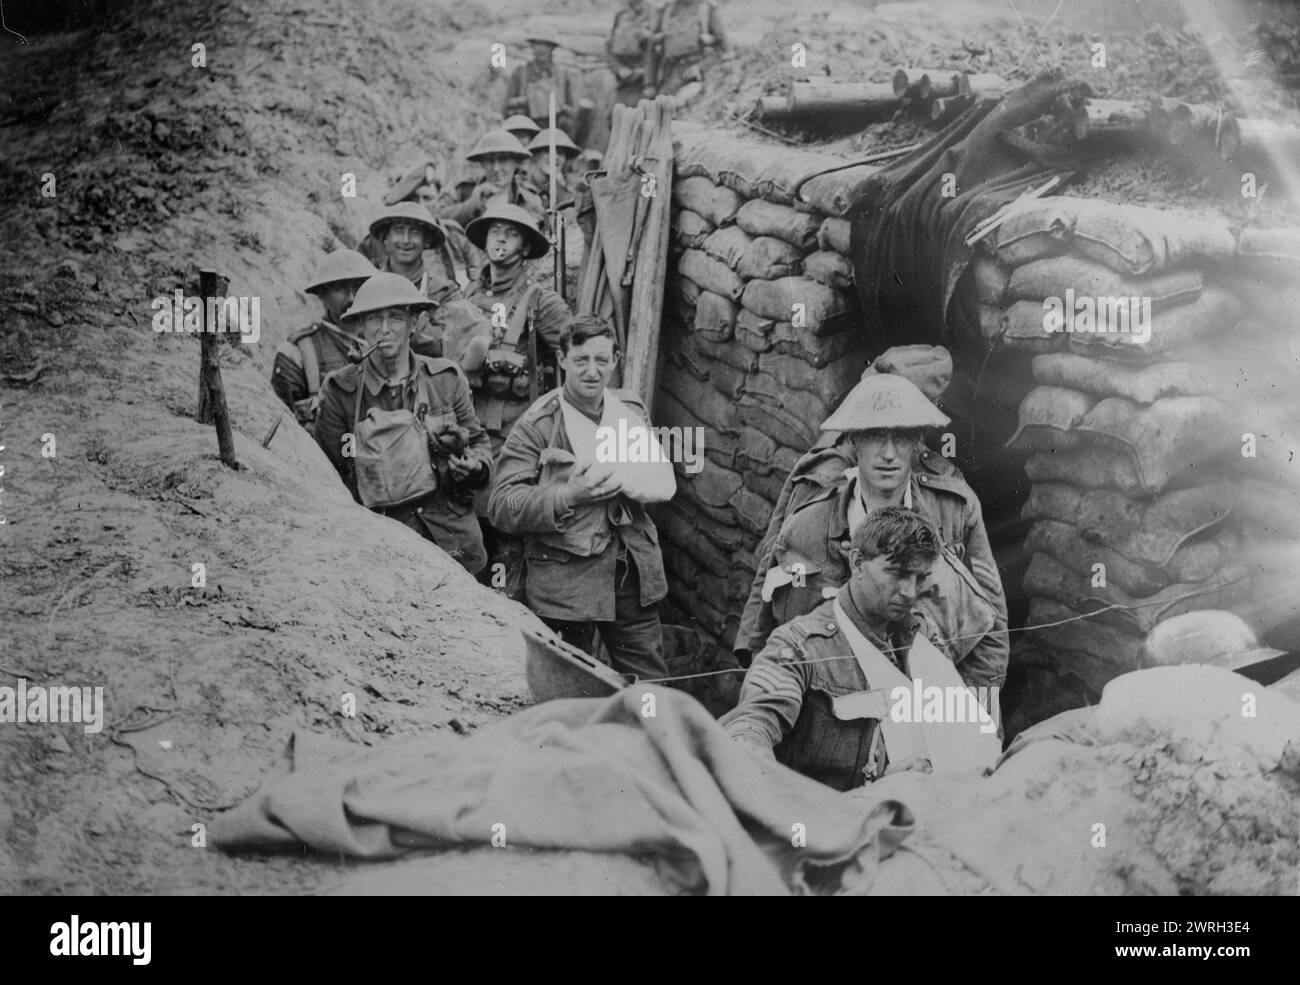 Wounded British in trench, 18 Aug 1918. Wounded British soldiers of the 27th Brigade, 9th Division, in a trench at a regimental aid post near Outtersteene Ridge following the formation's successful attack on Outtersteene Ridge, Flanders, Belgium, August 18, 1918 during World War I. Stock Photo